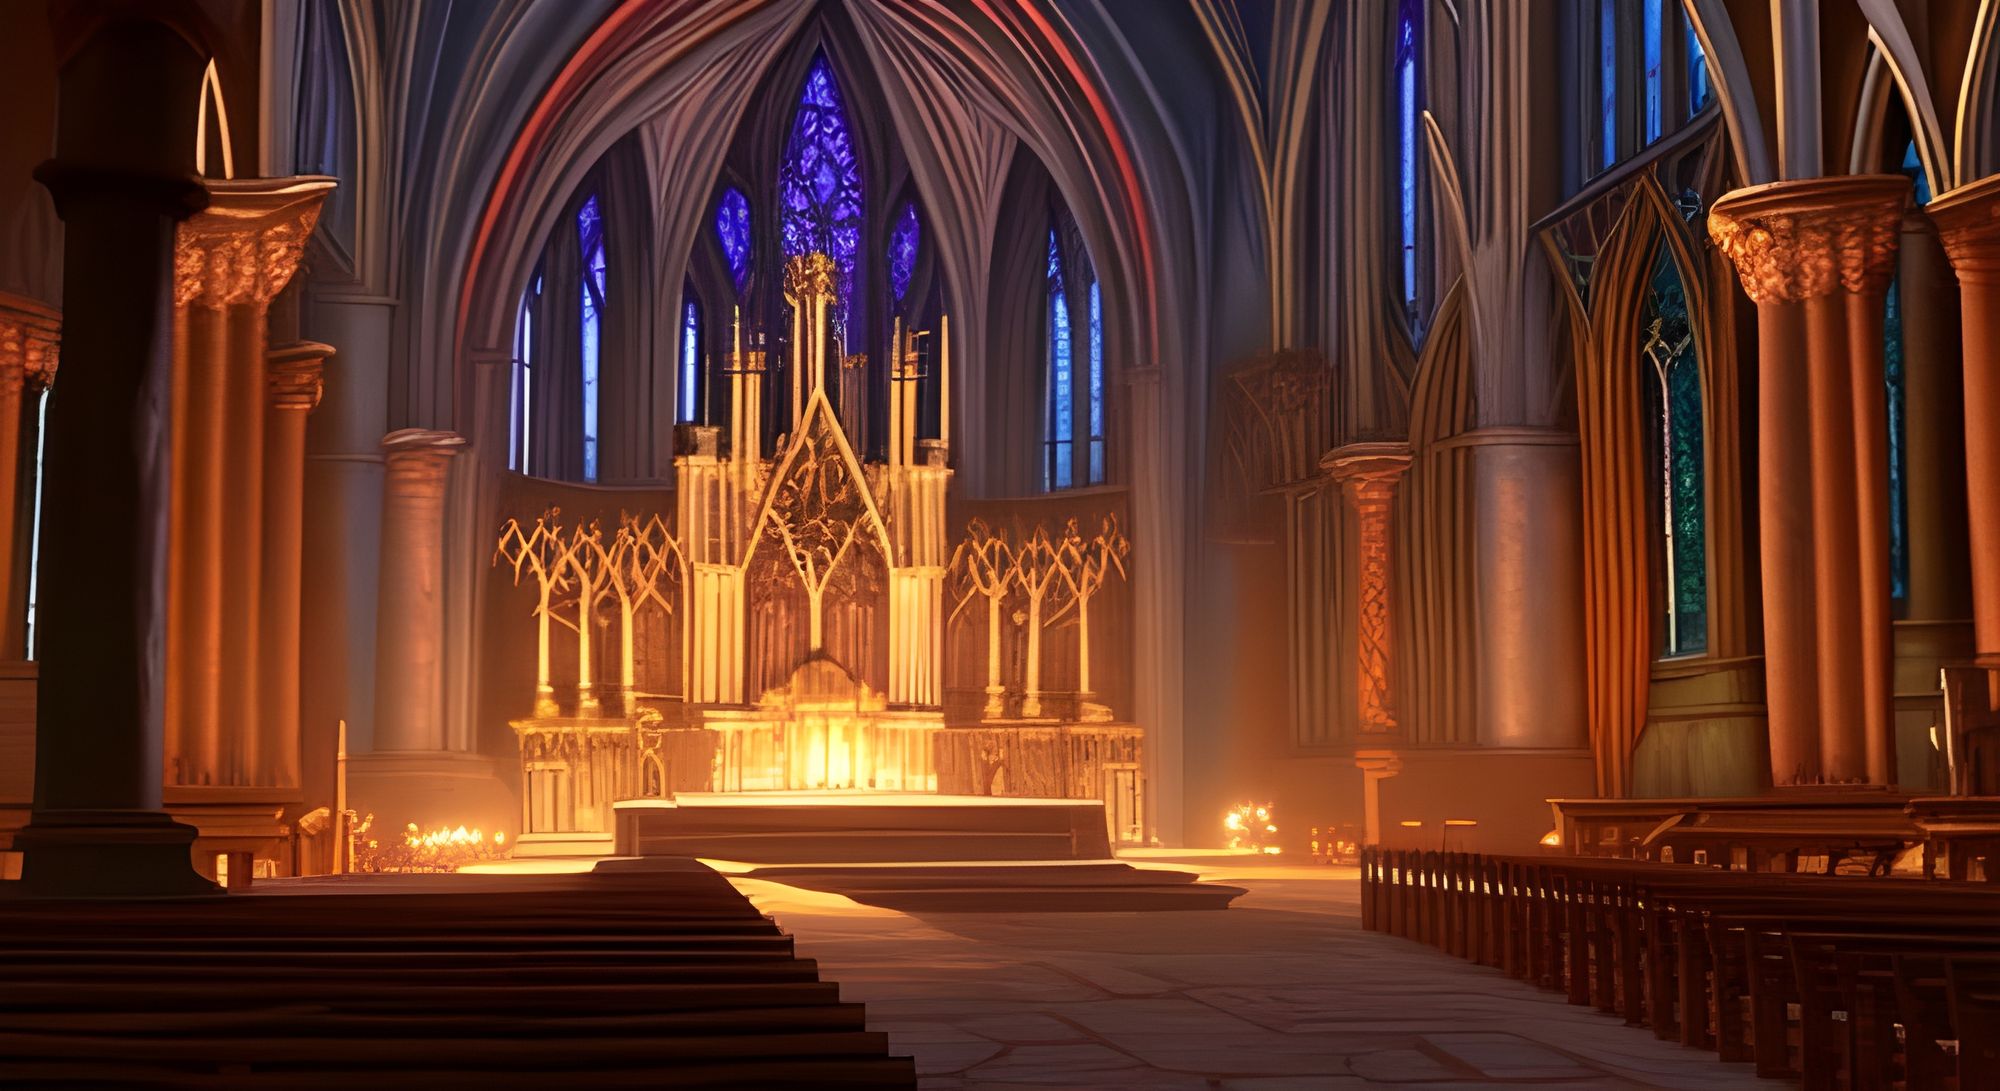 Wallpaper  temple anime building symmetry arch church cathedral  Gothic architecture landmark place of worship 1920x1080  Grebnes   285419  HD Wallpapers  WallHere